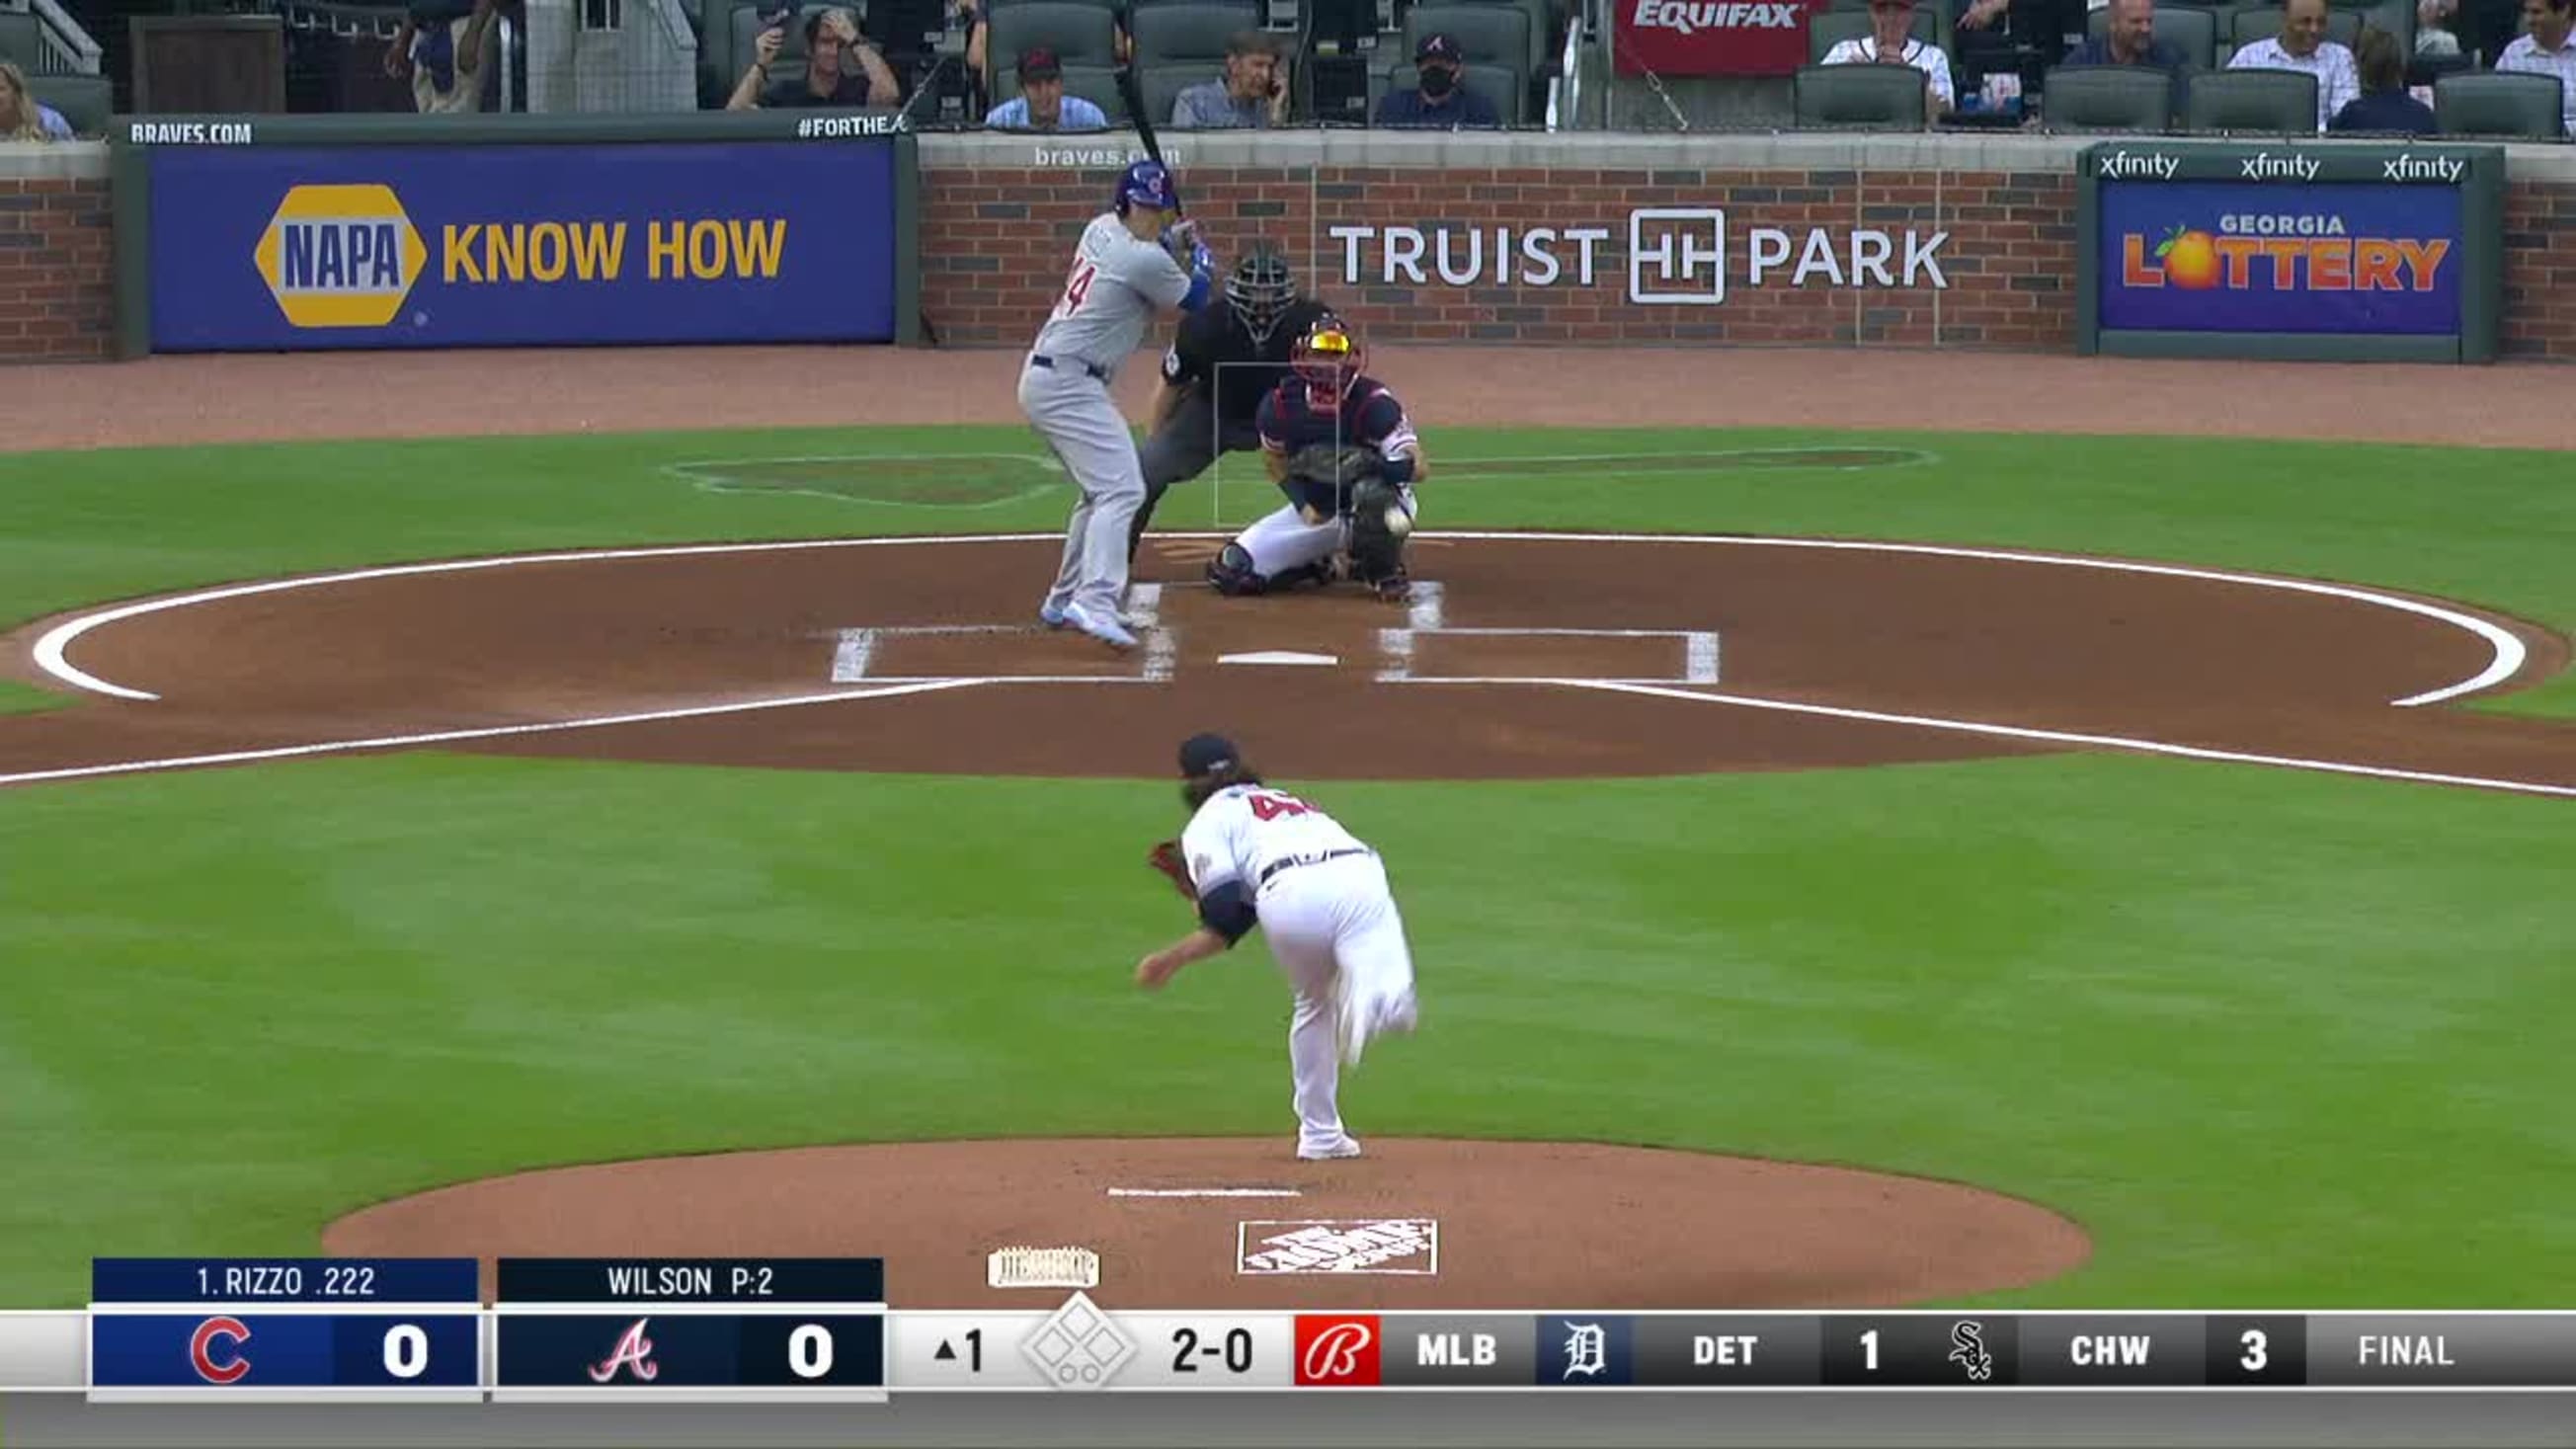 Braves' Ronald Acuña Jr. hit on the left elbow by a pitch, leaves